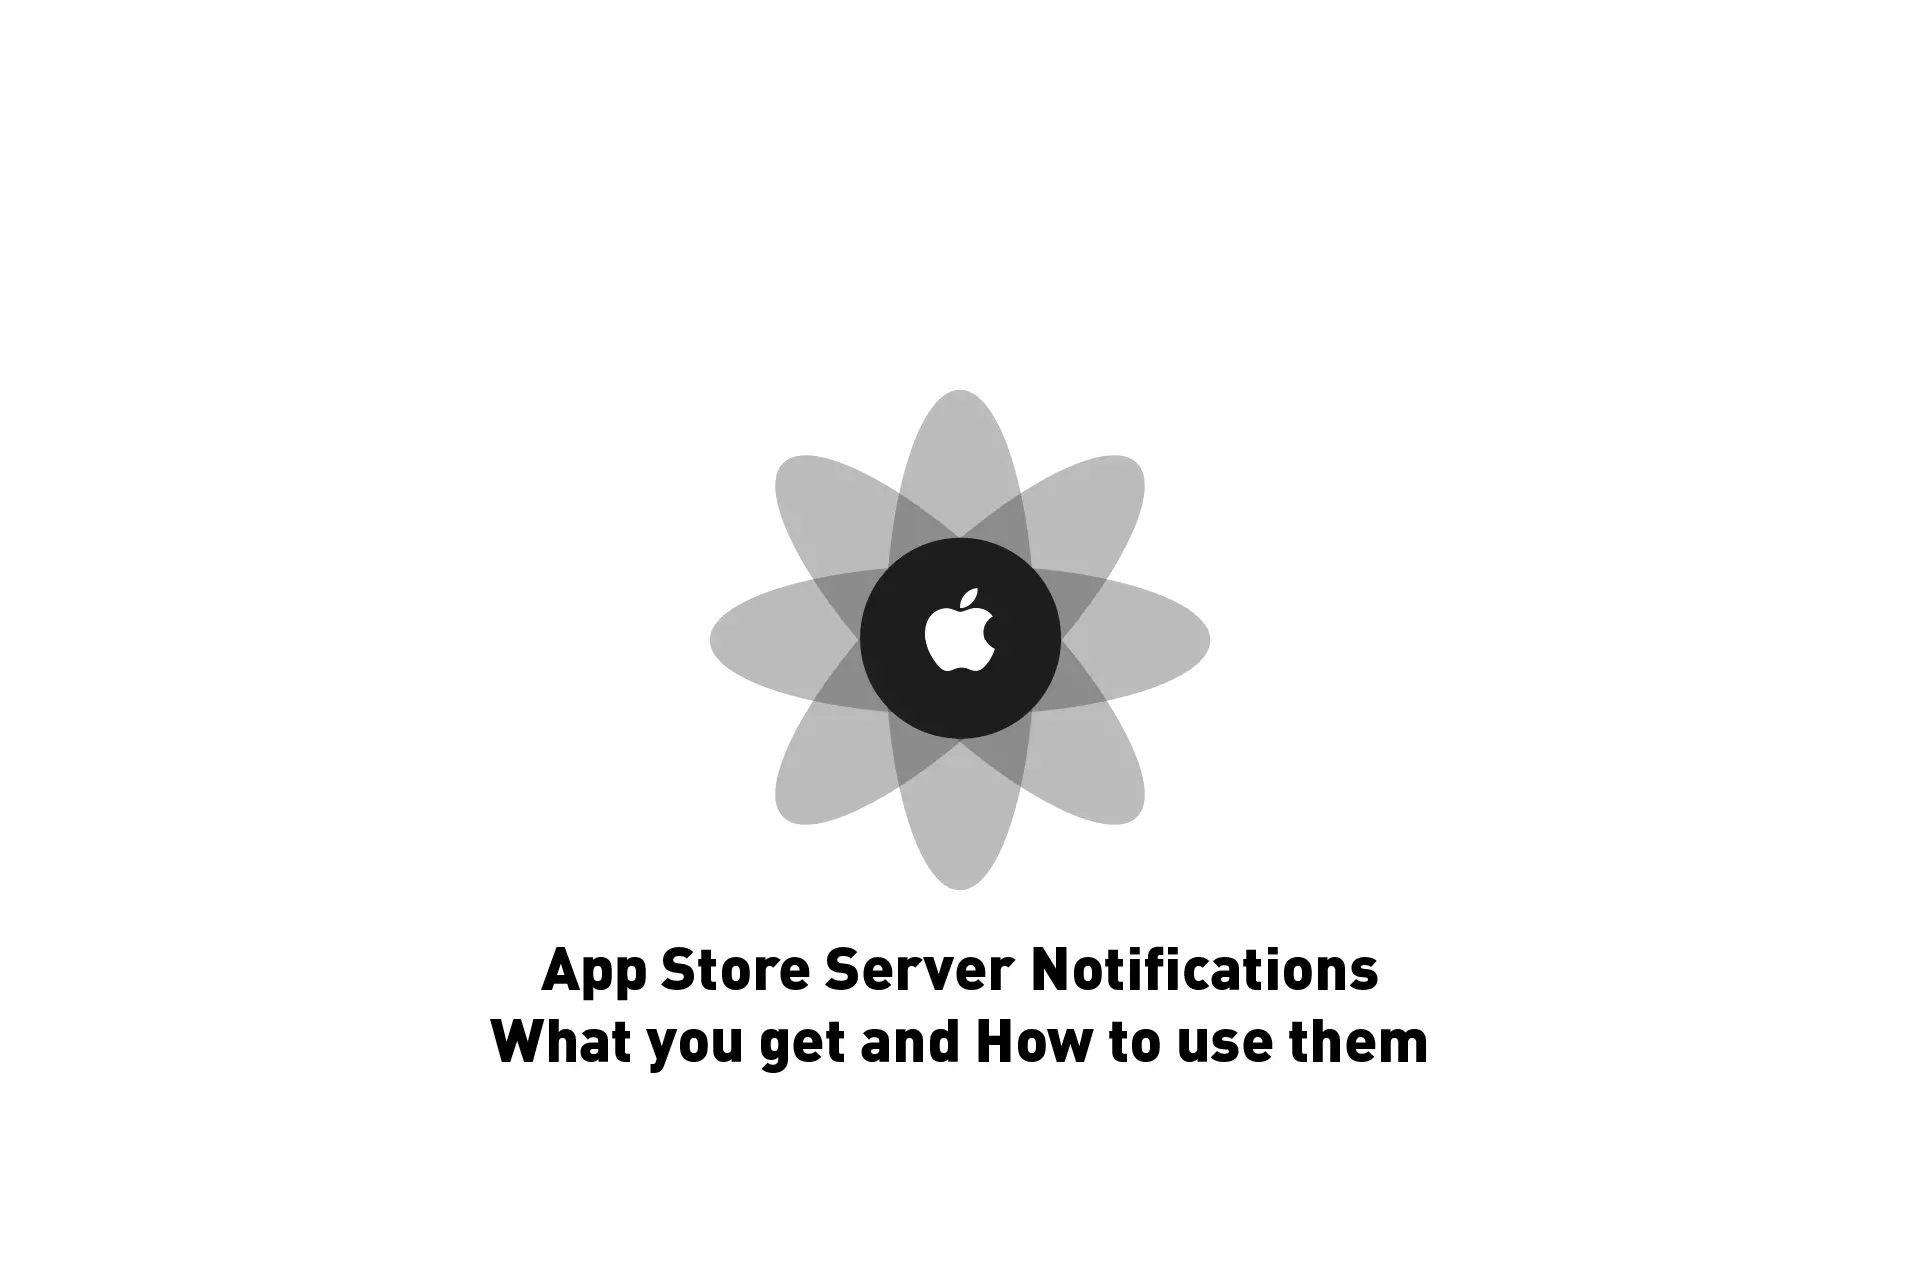 A flower that represents Apple with the text "App Store Server Notifications What you get and How to use them" beneath it.